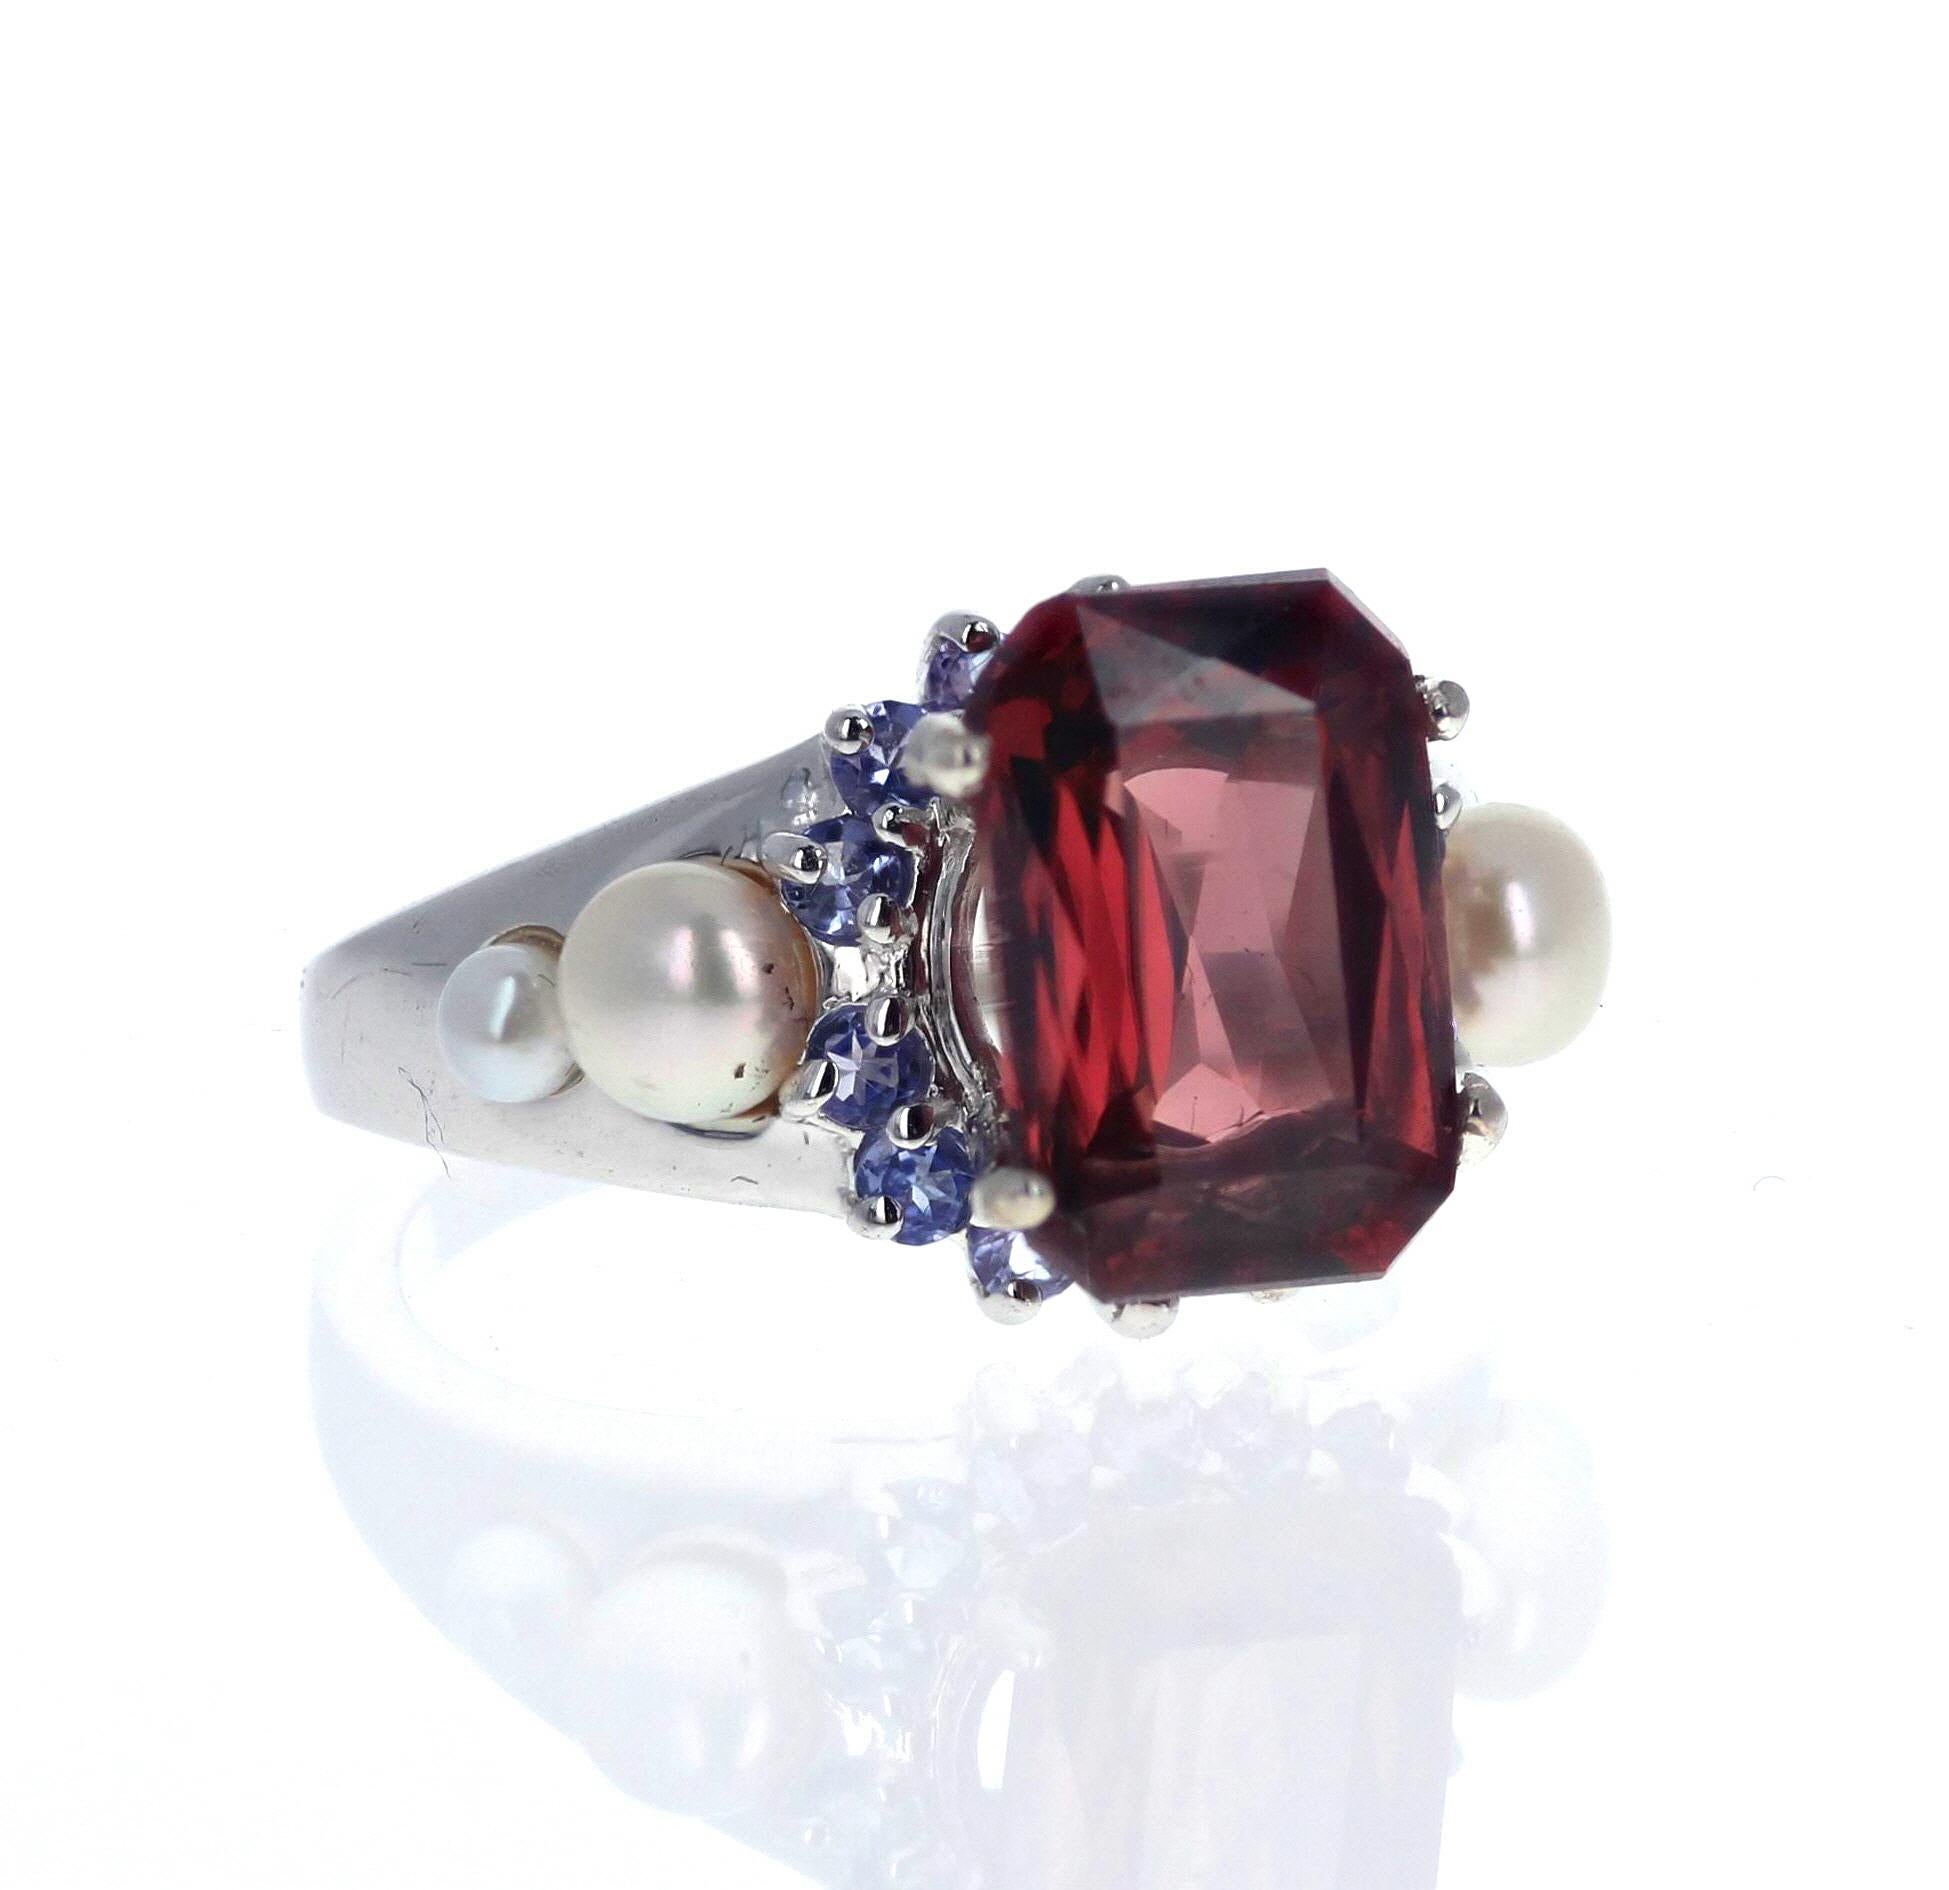 Women's or Men's AJD Elegant 7.2 Ct Brilliant Red Zircon, Sapphire, Pearl Sterling Cocktail Ring